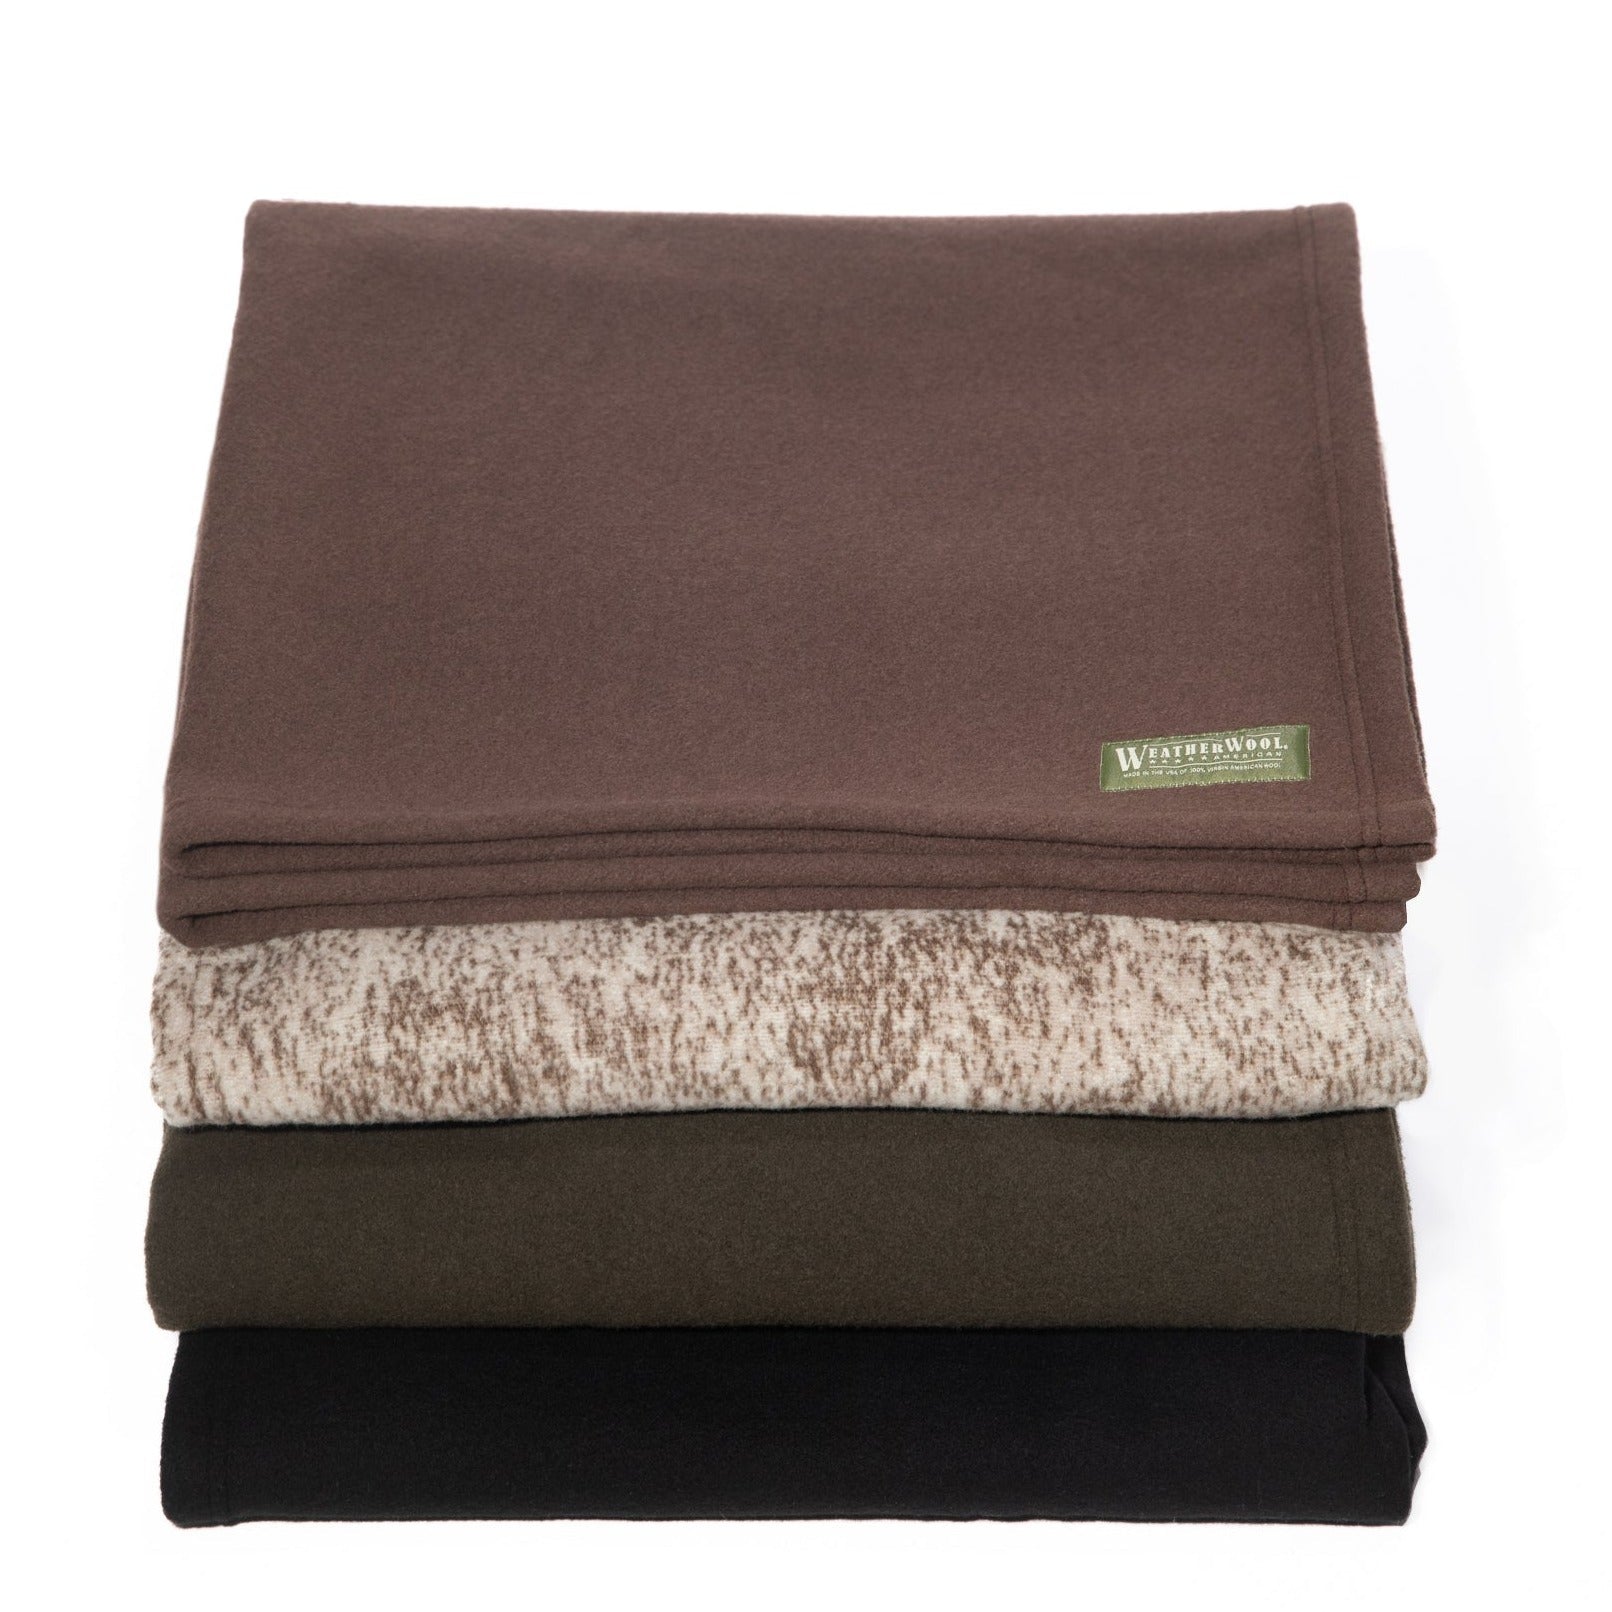 WeatherWool offers Blankets in a full range of sizes from Crib and Swaddling Blankets up to King Size Blankets … all made from our 100% Merino Jacquard Fabric.  Made in USA as always!